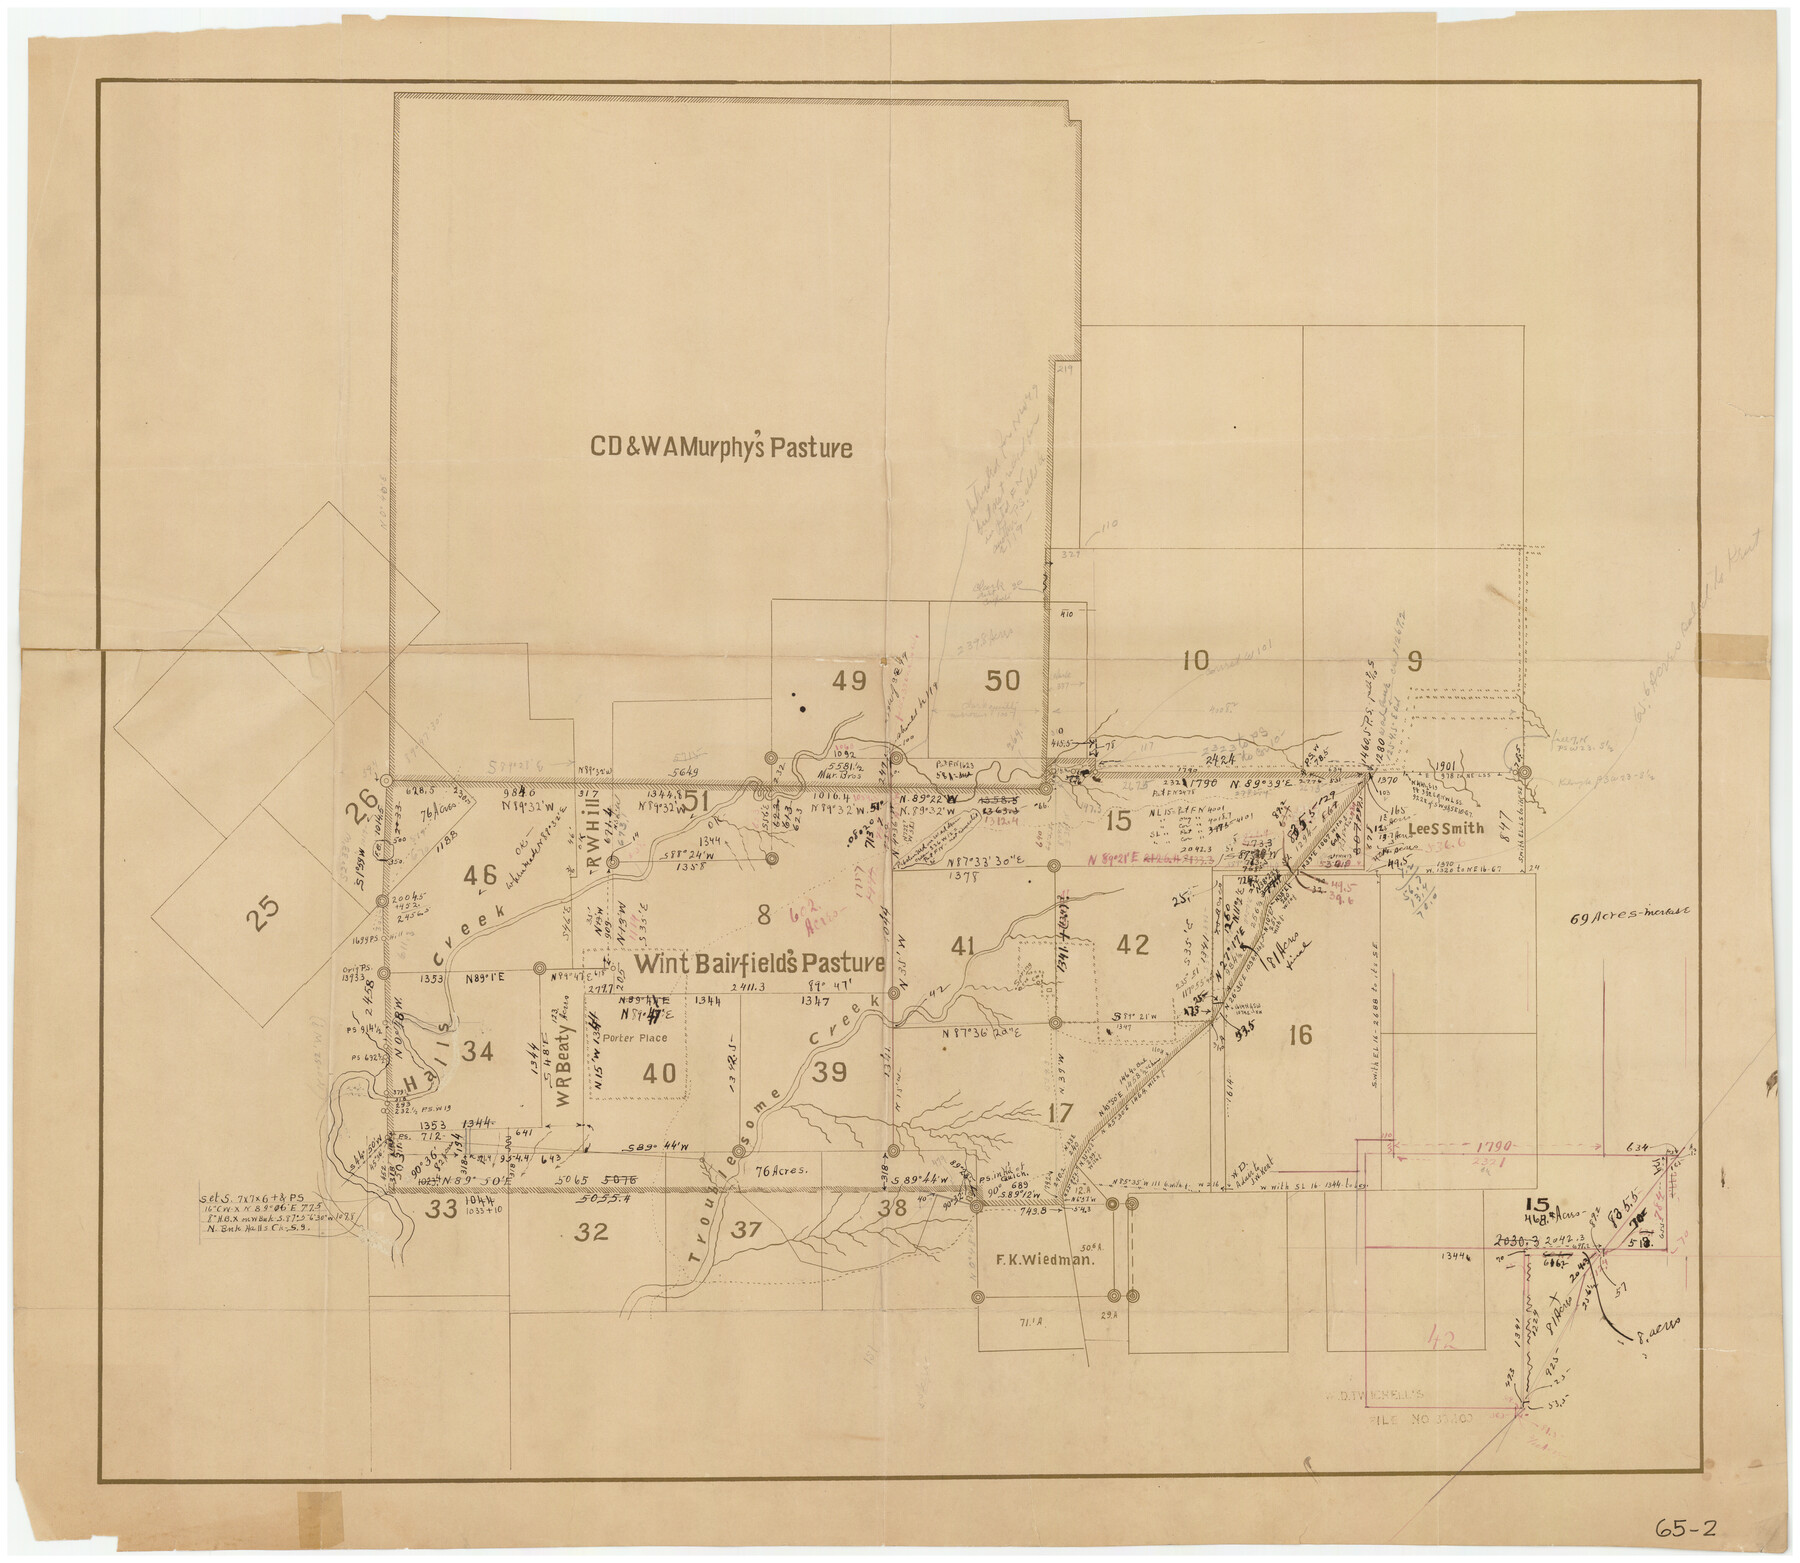 90935, [Sketch showing C. D. & W. A. Murphy's Pasture and Wint Barfield's Pasture], Twichell Survey Records